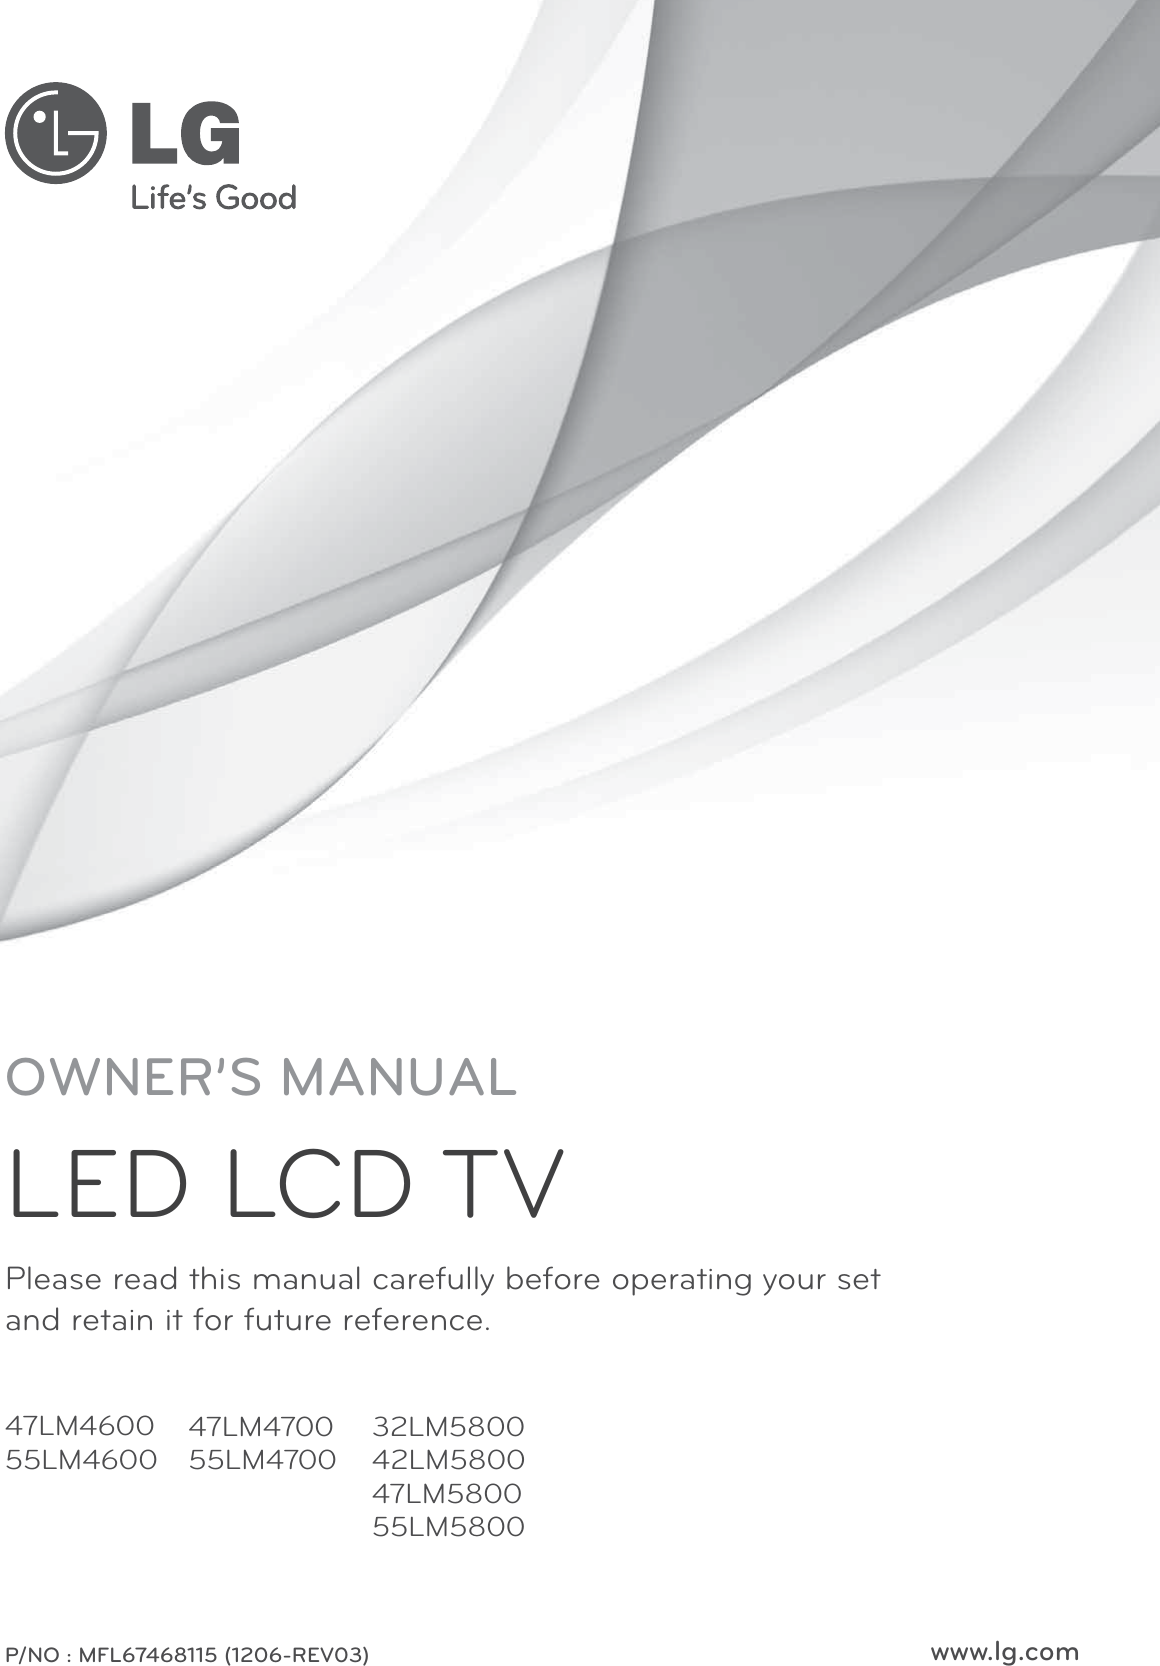 www.lg.comPlease read this manual carefully before operating your set  and retain it for future reference.47LM460055LM4600P/NO : MFL67468115 (1206-REV03)47LM470055LM470032LM580042LM580047LM580055LM5800OWNER’S MANUALLED LCD TV